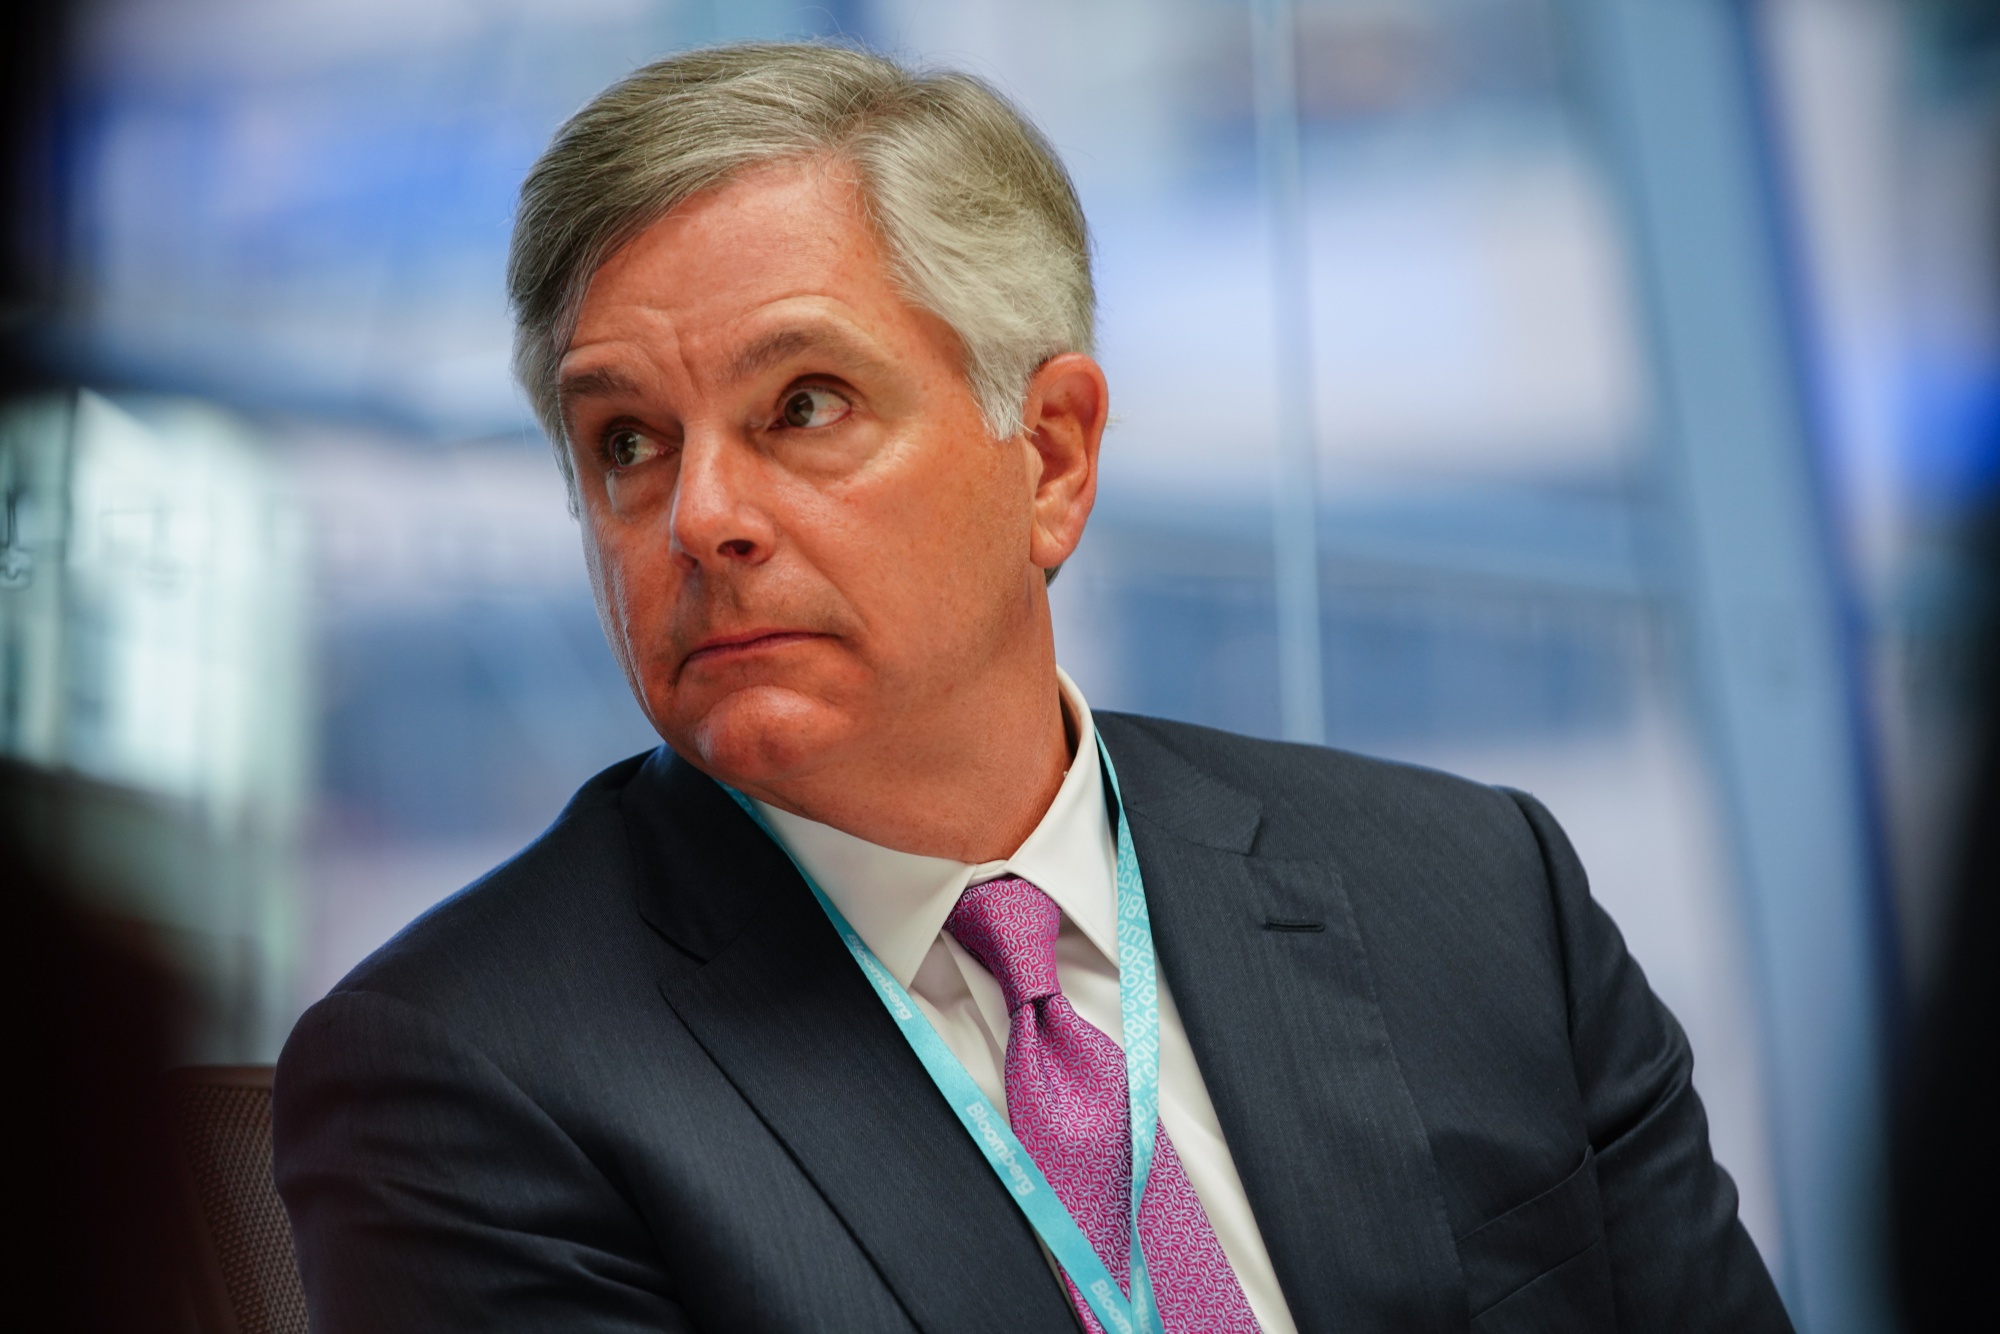 Speculation rises on potential candidates, including GE CEO Larry Culp (Credits: Bloomberg)